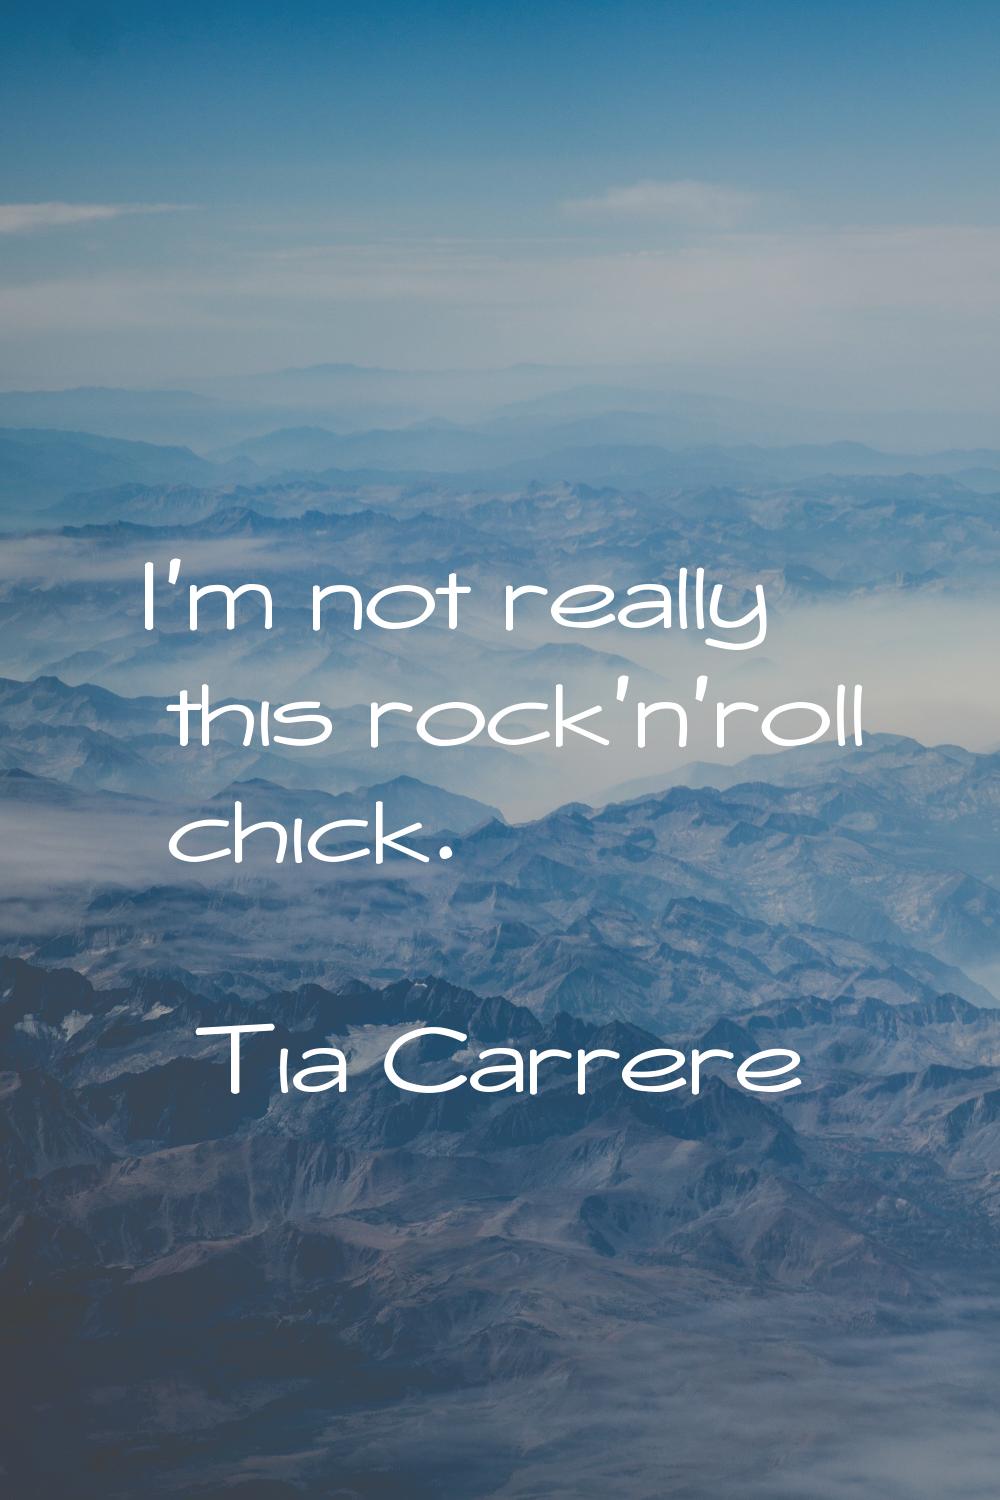 I'm not really this rock'n'roll chick.